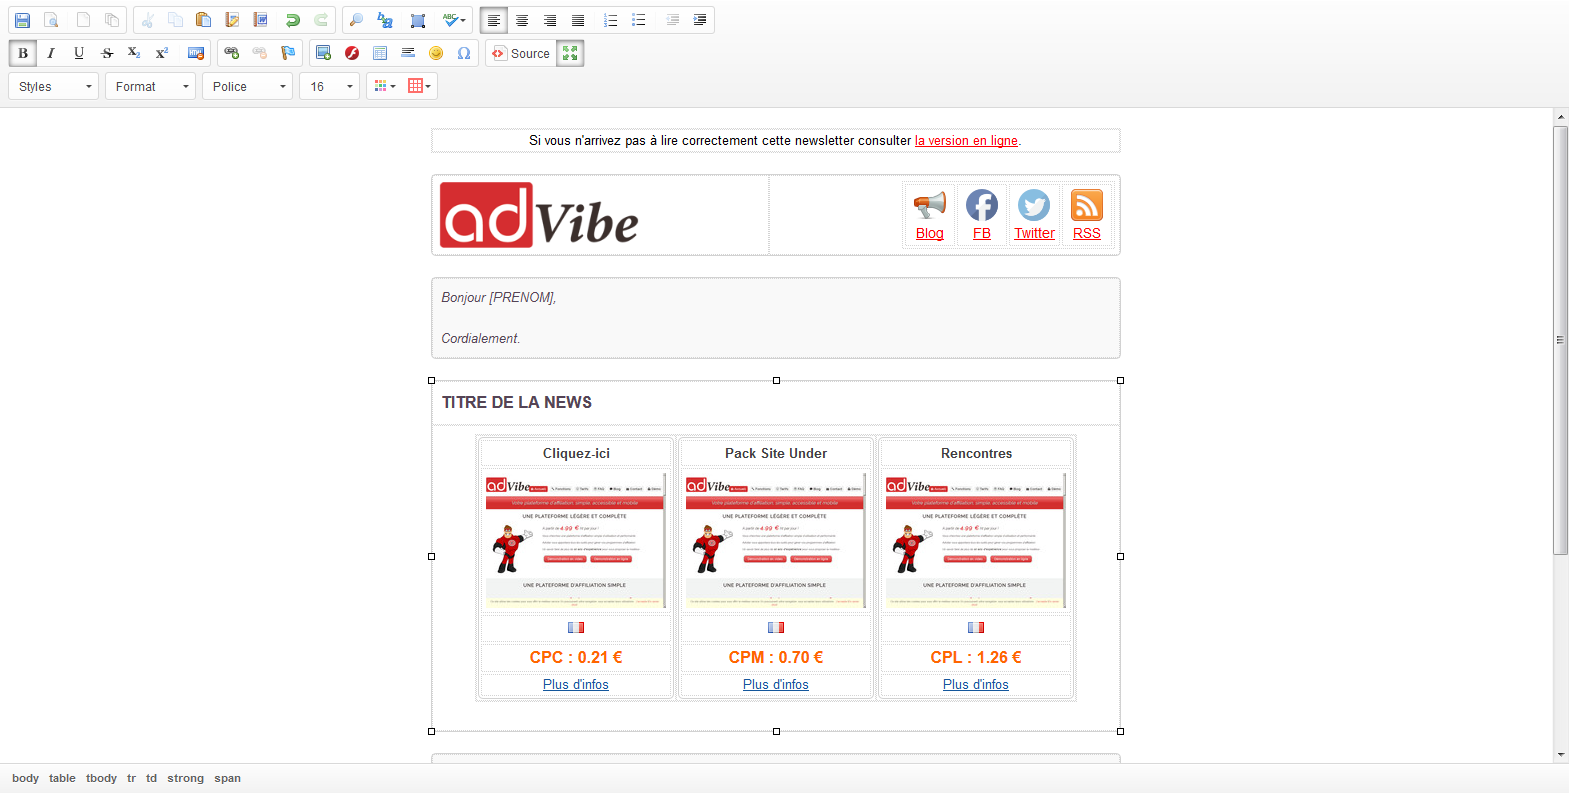 adVibe - Gestion des newsletters